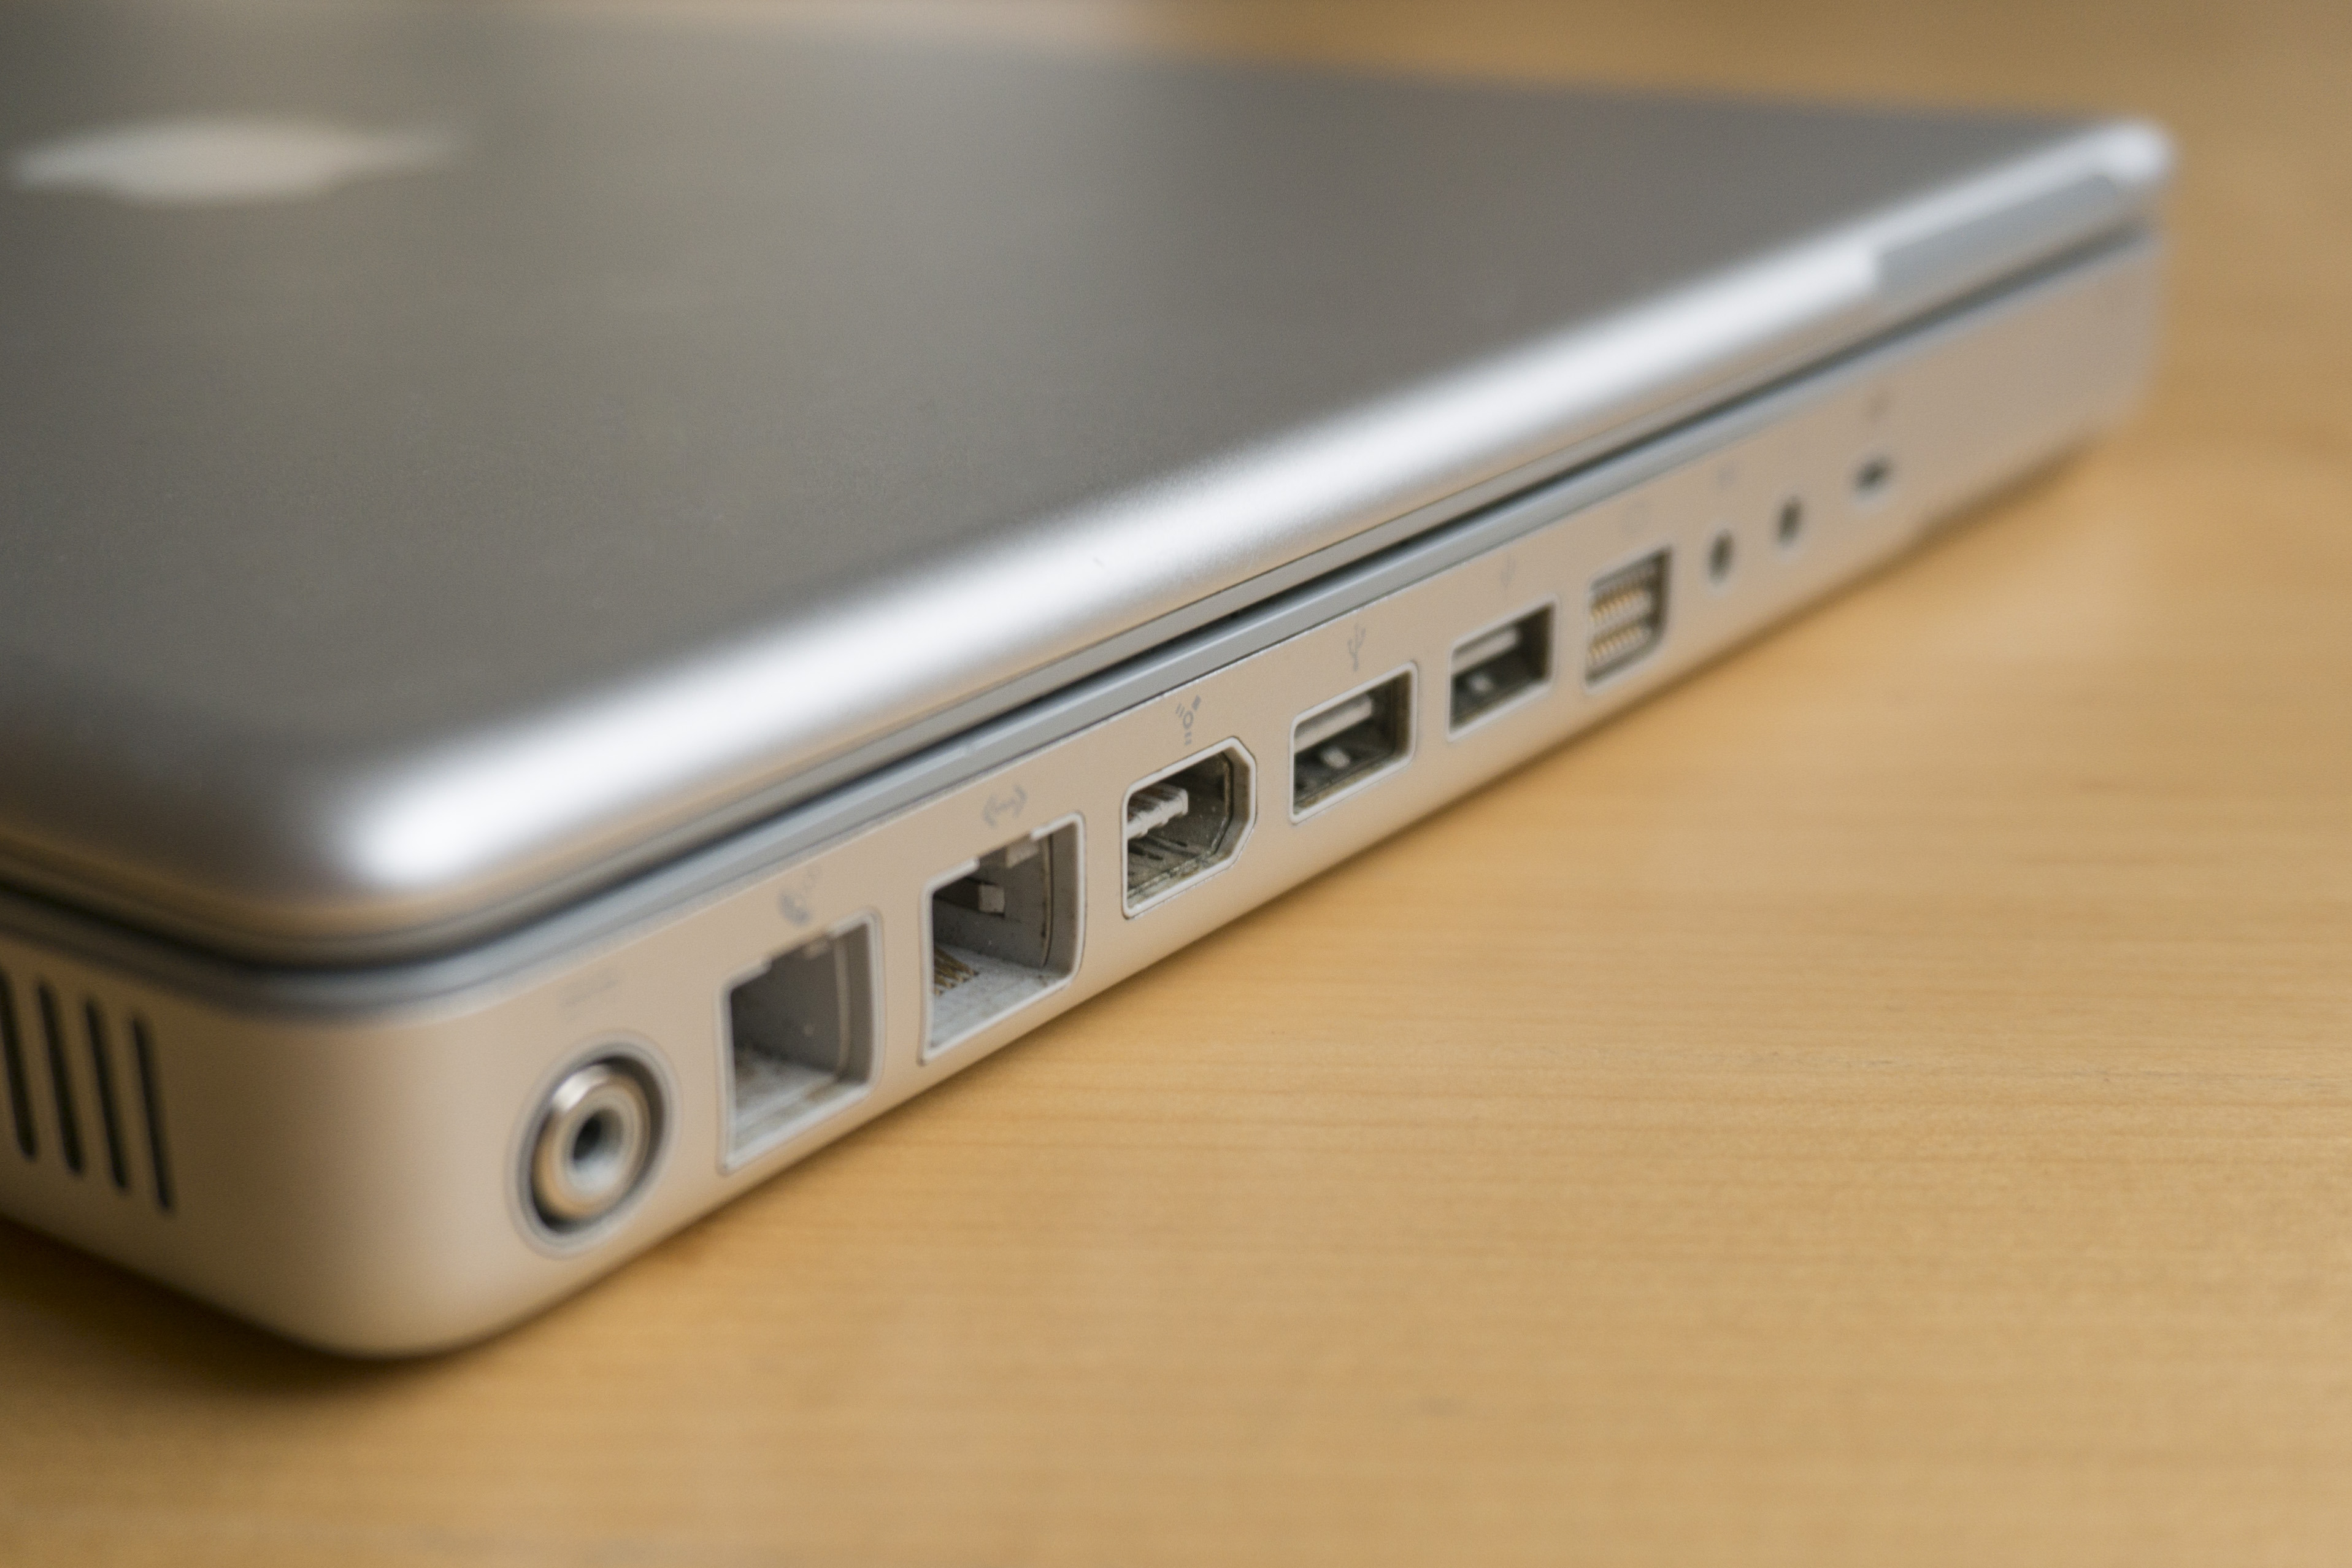 Parallels For Mac Powerbook G4